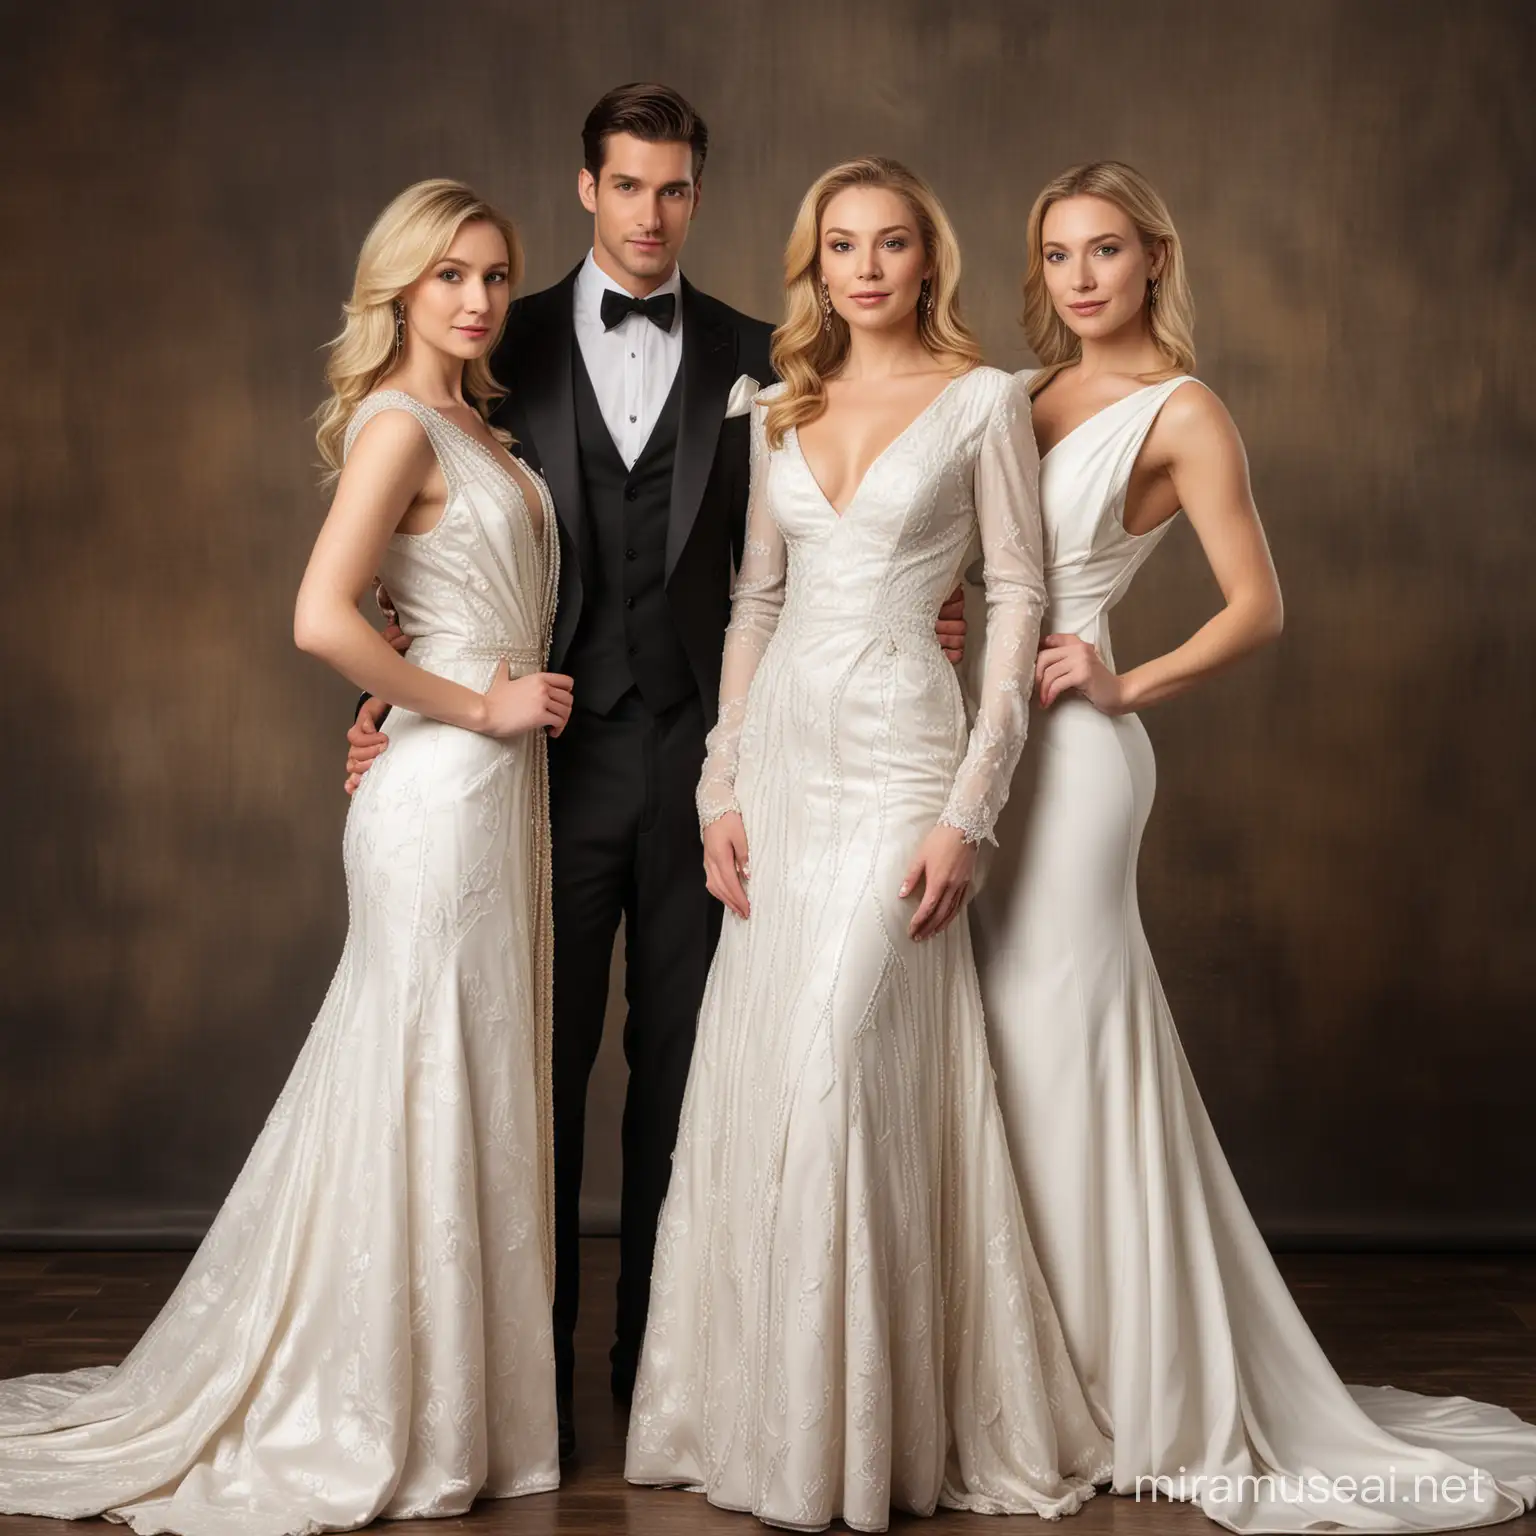 Two beautiful white women dressed in a fancy gown holding a handsome white man dressed in suit. A rich theme as the background.